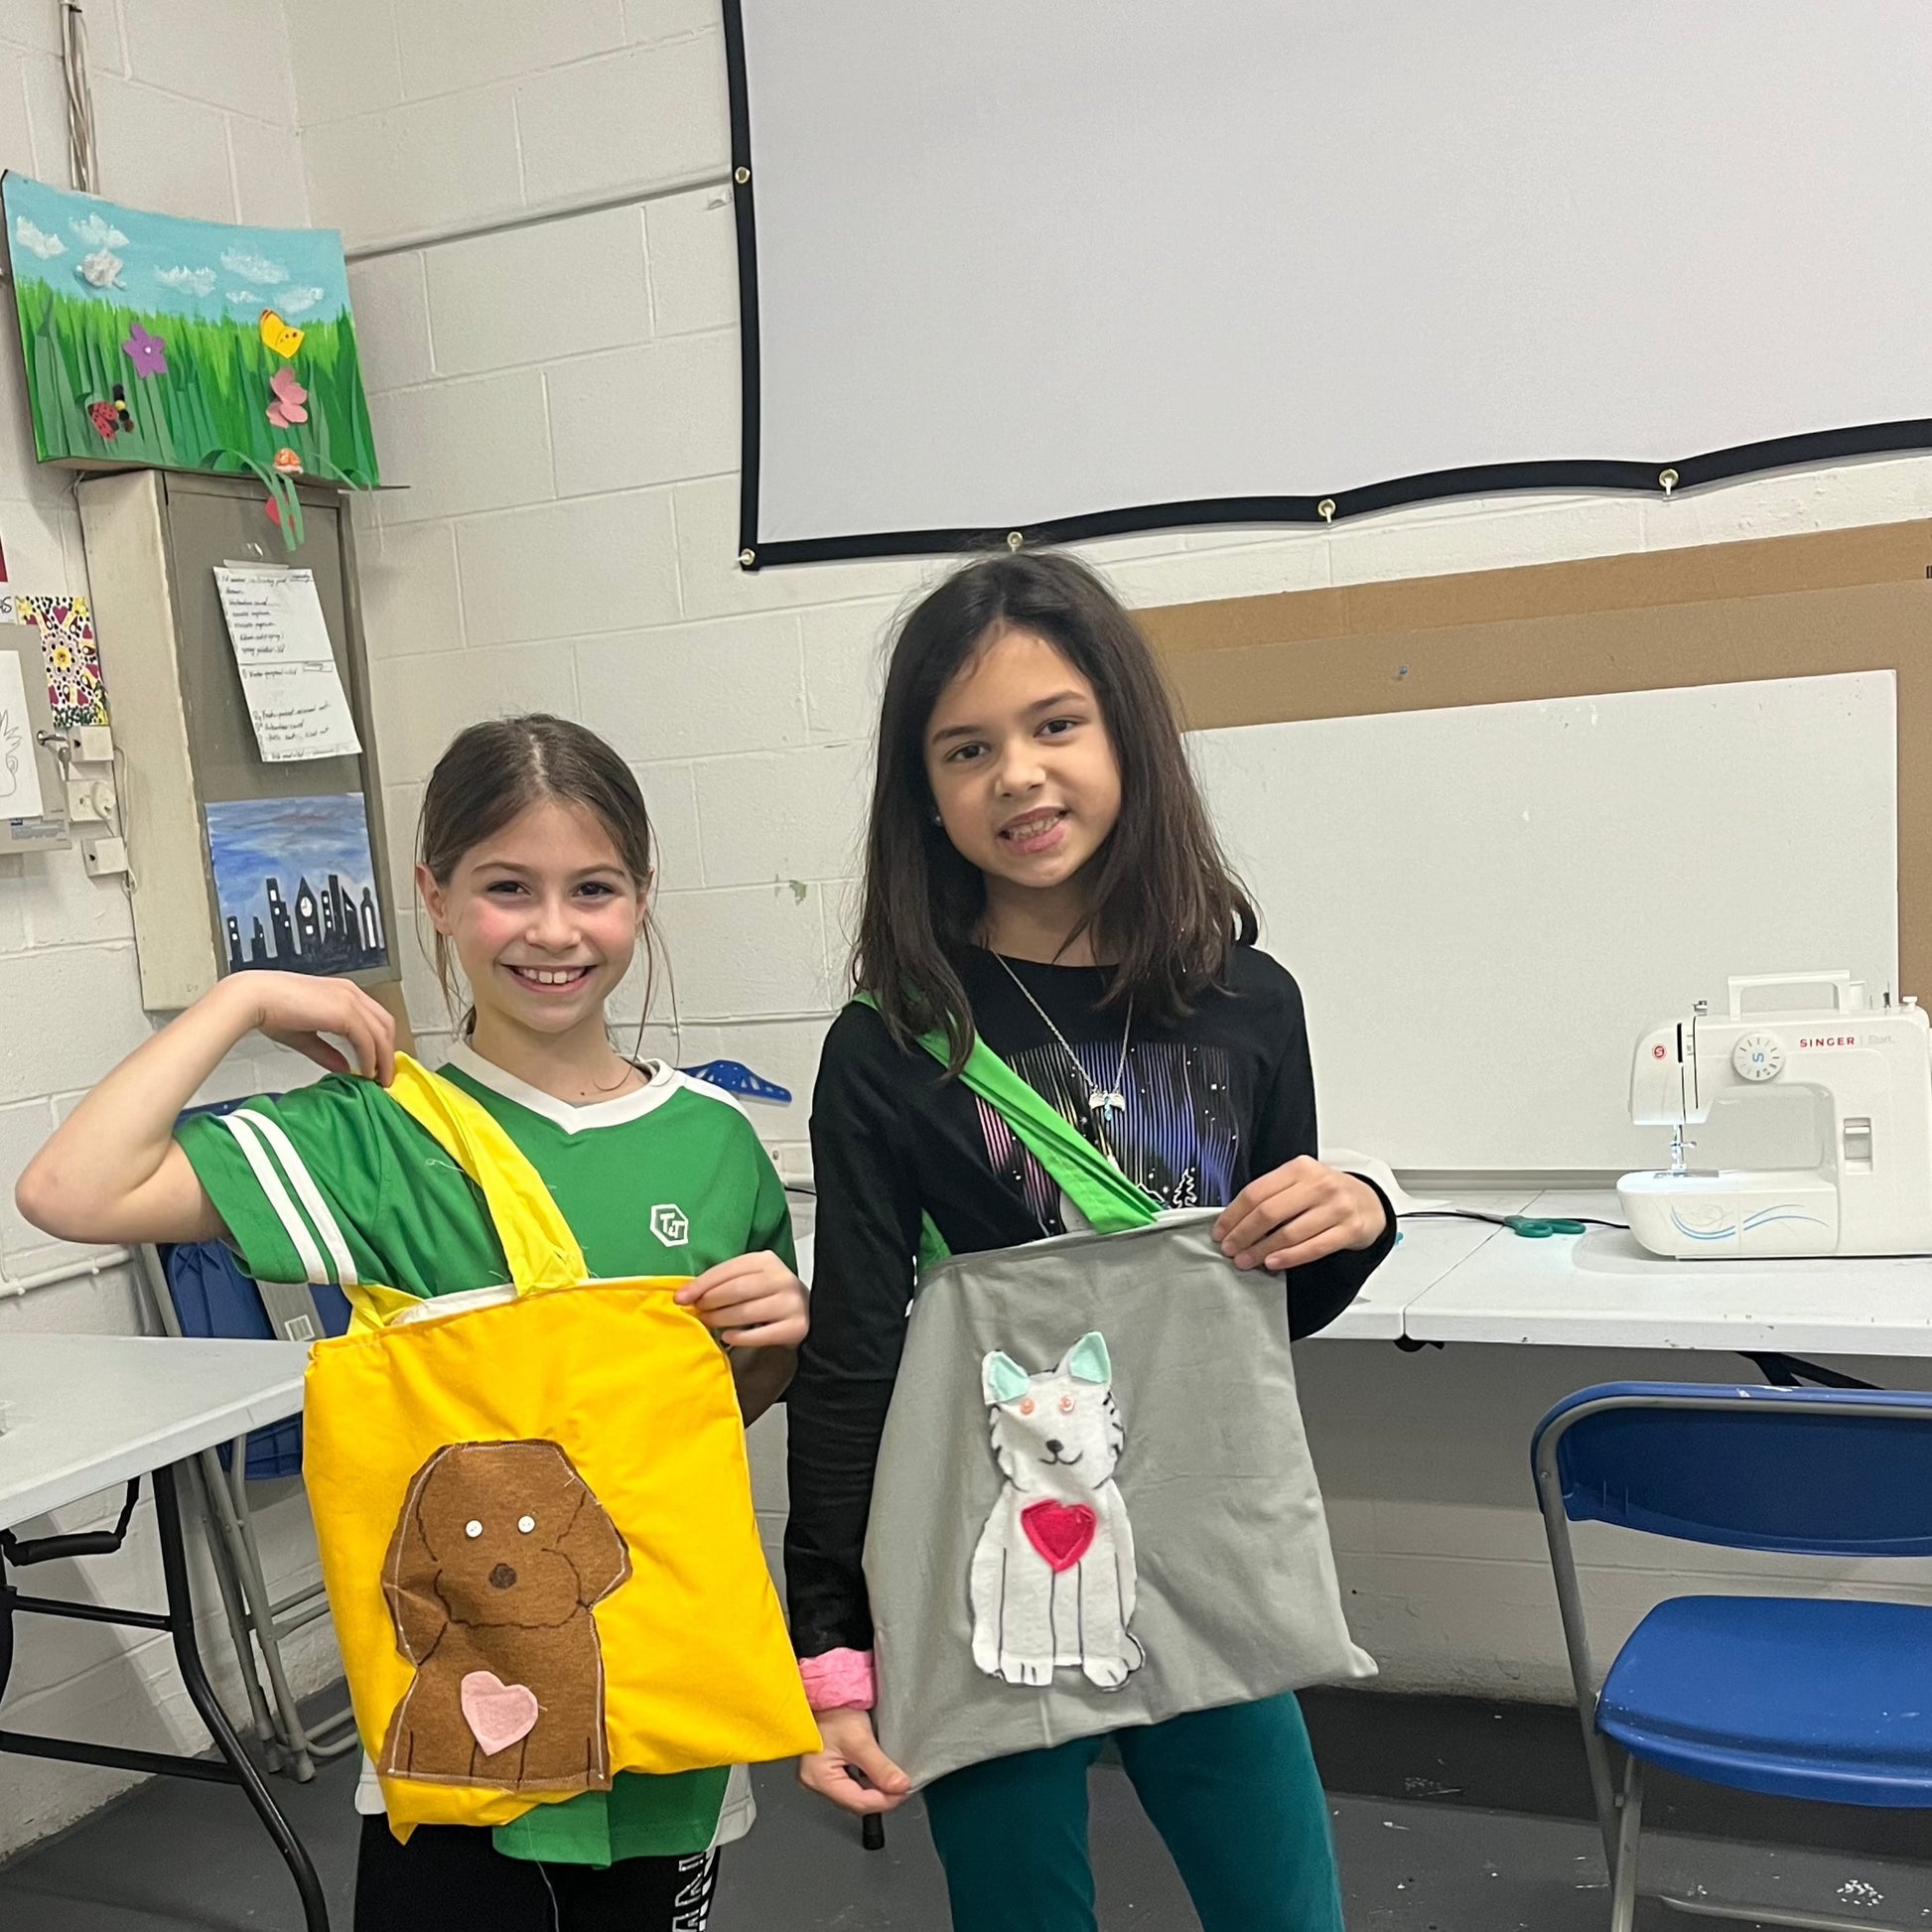 Hand and Machine Sewing, Crochet, Embroidery, and Crafting: These foundational skills are the bedrock of our curriculum, providing a diverse range of techniques for your child to master.